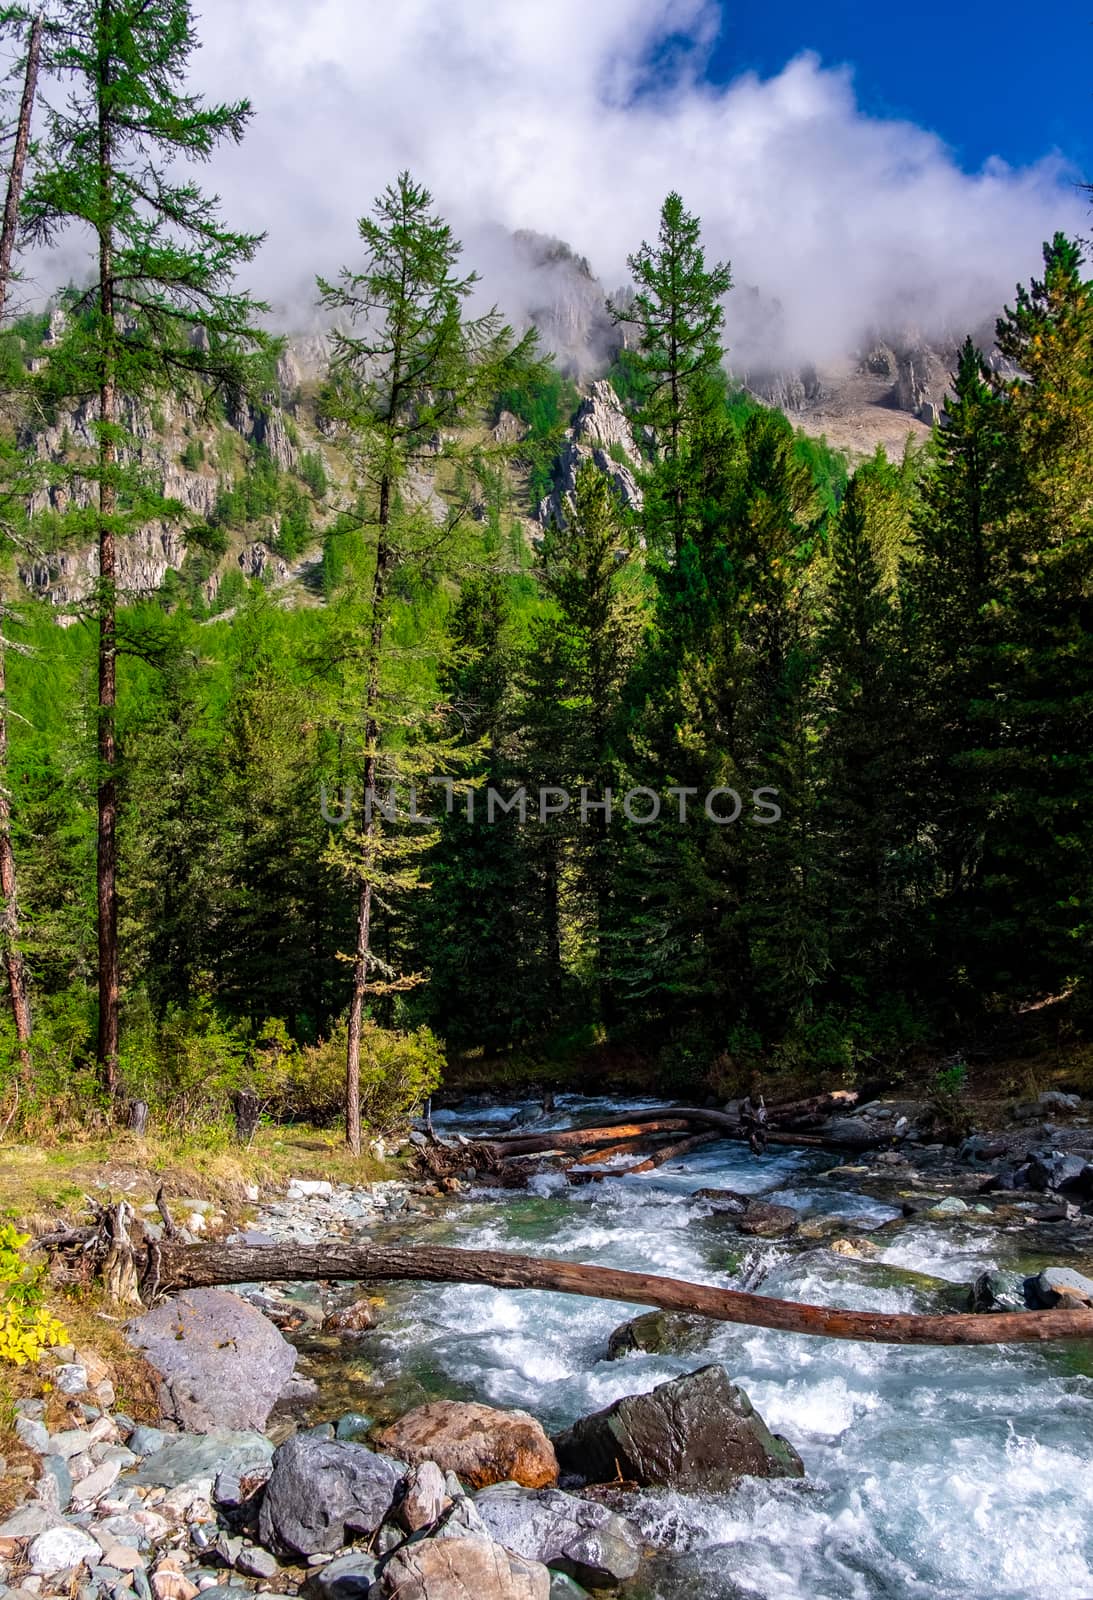 Mountain stream on the background of mountain peaks shrouded in fog.